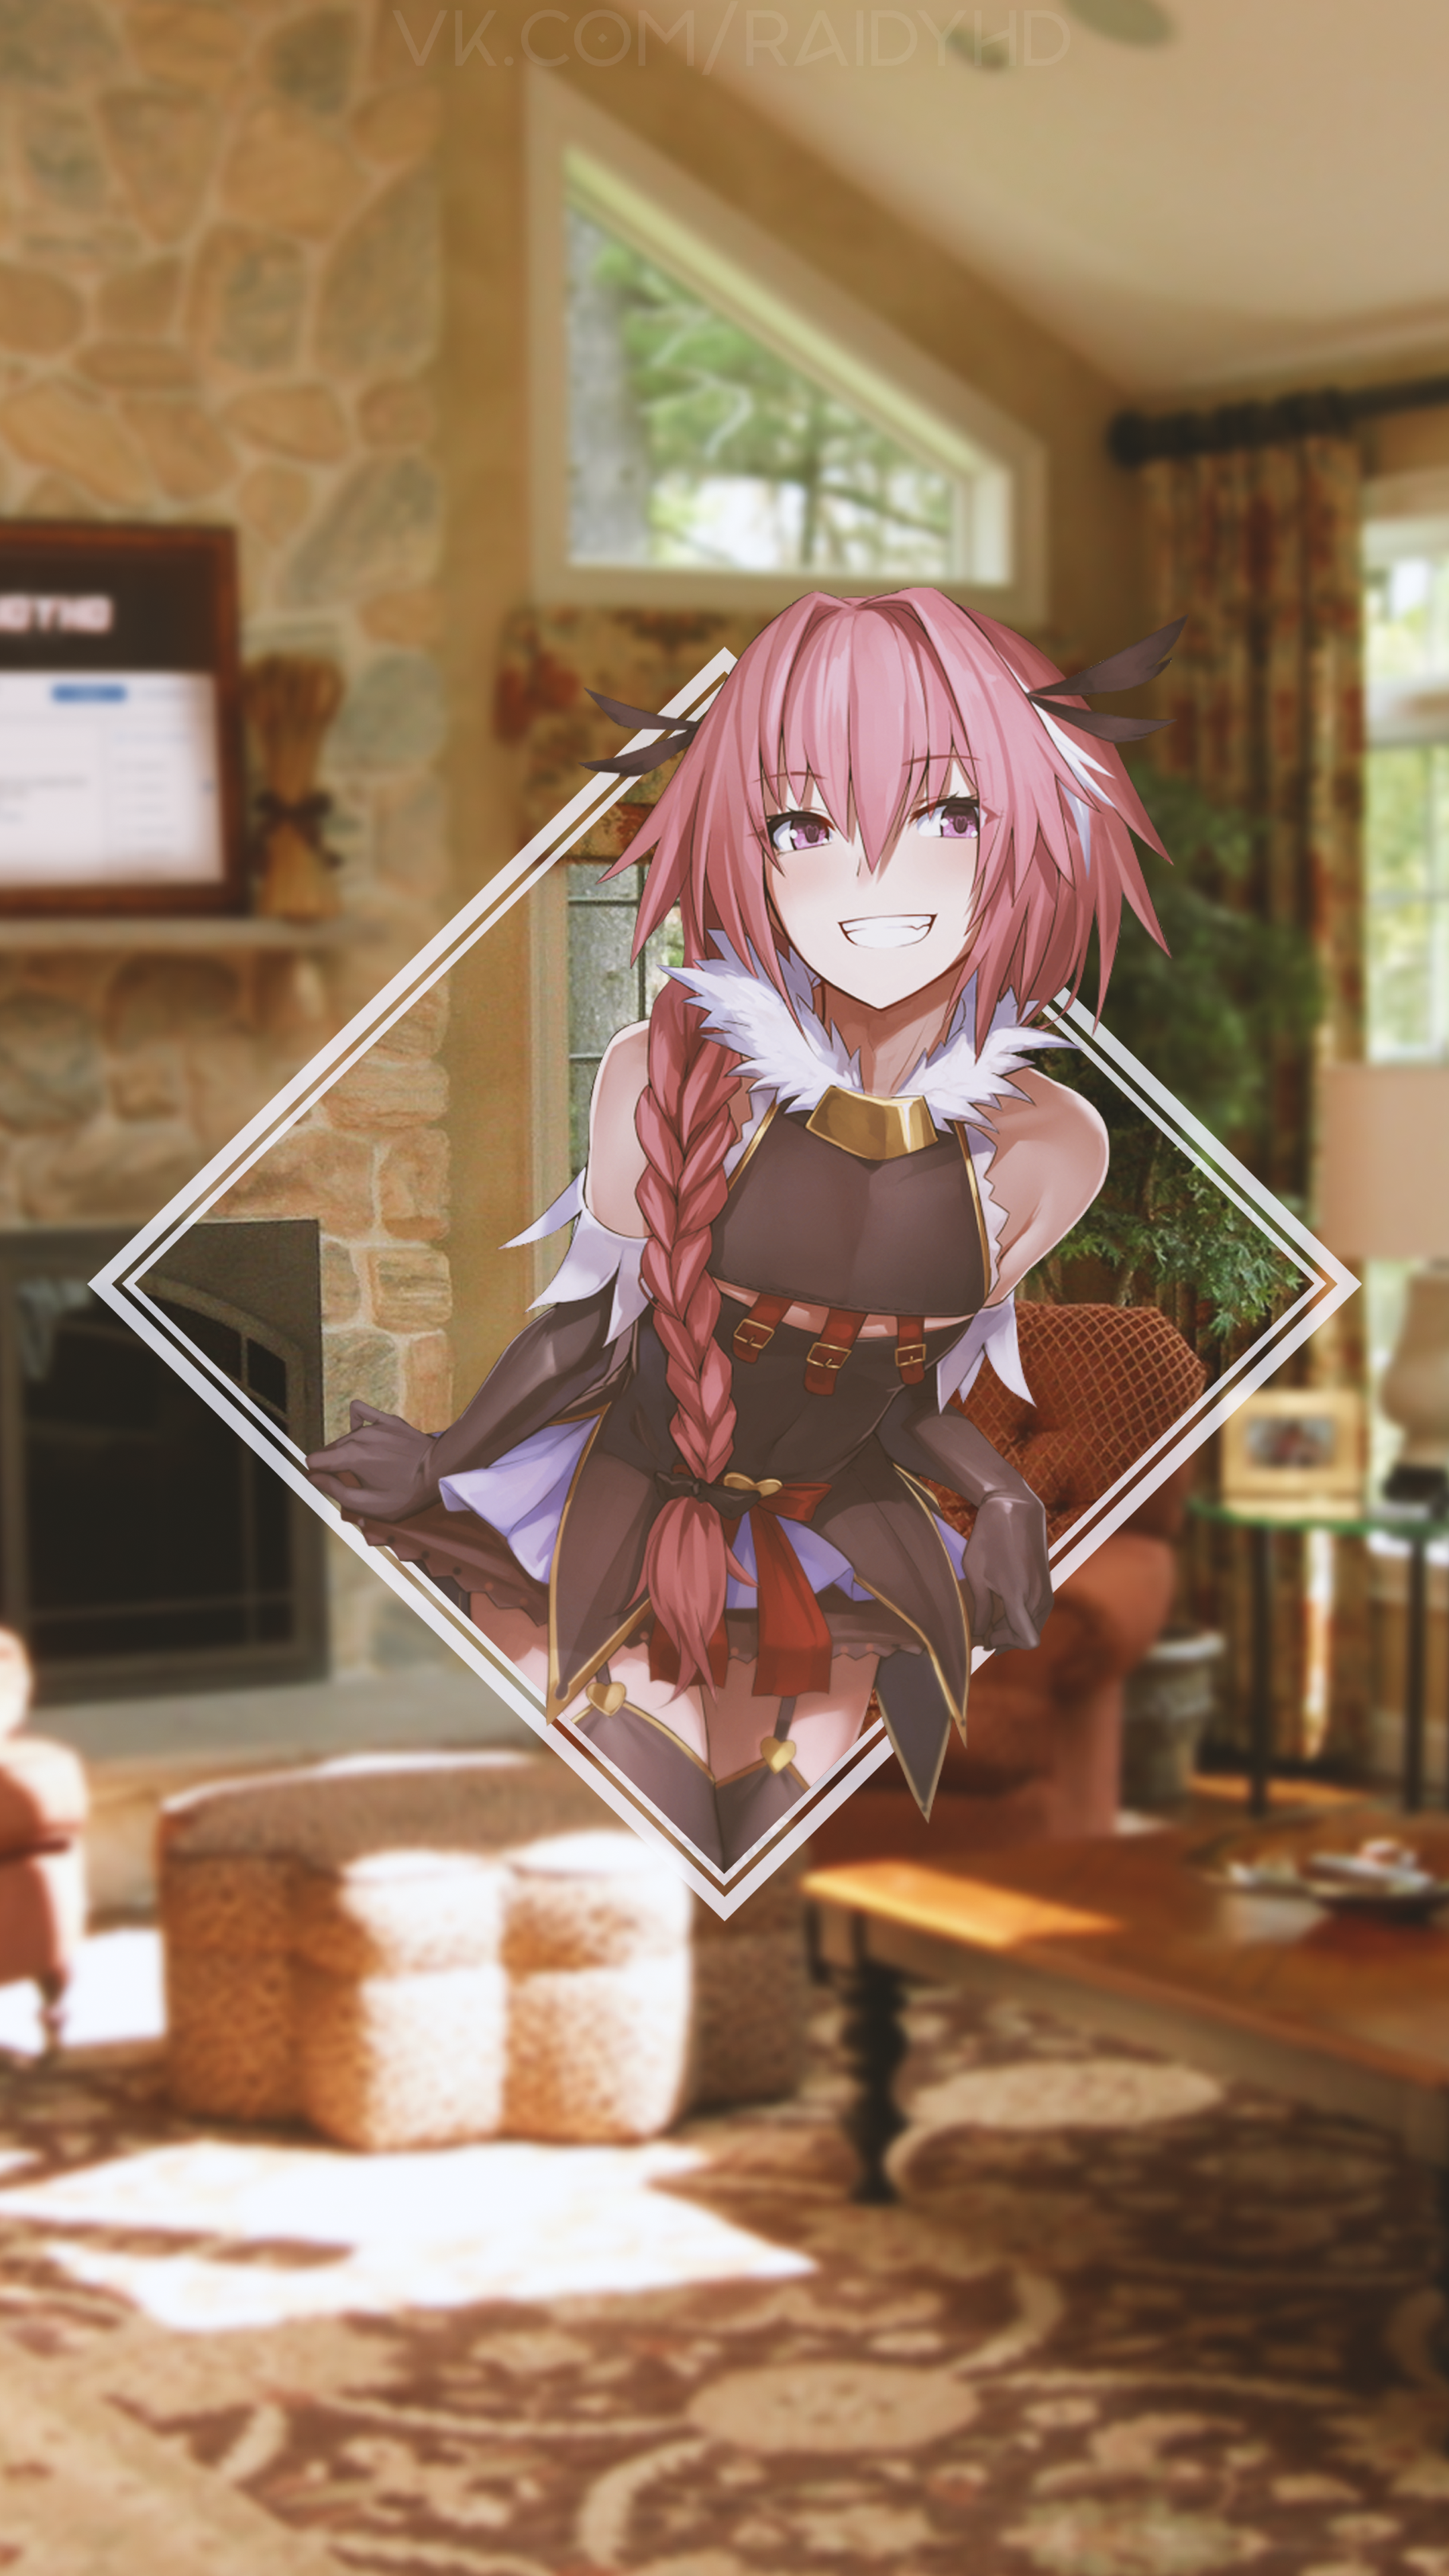 Anime Anime Boys Picture In Picture Fate Grand Order FGO Astolfo Astolfo Fate Apocrypha Rider Of Bla 2160x3840